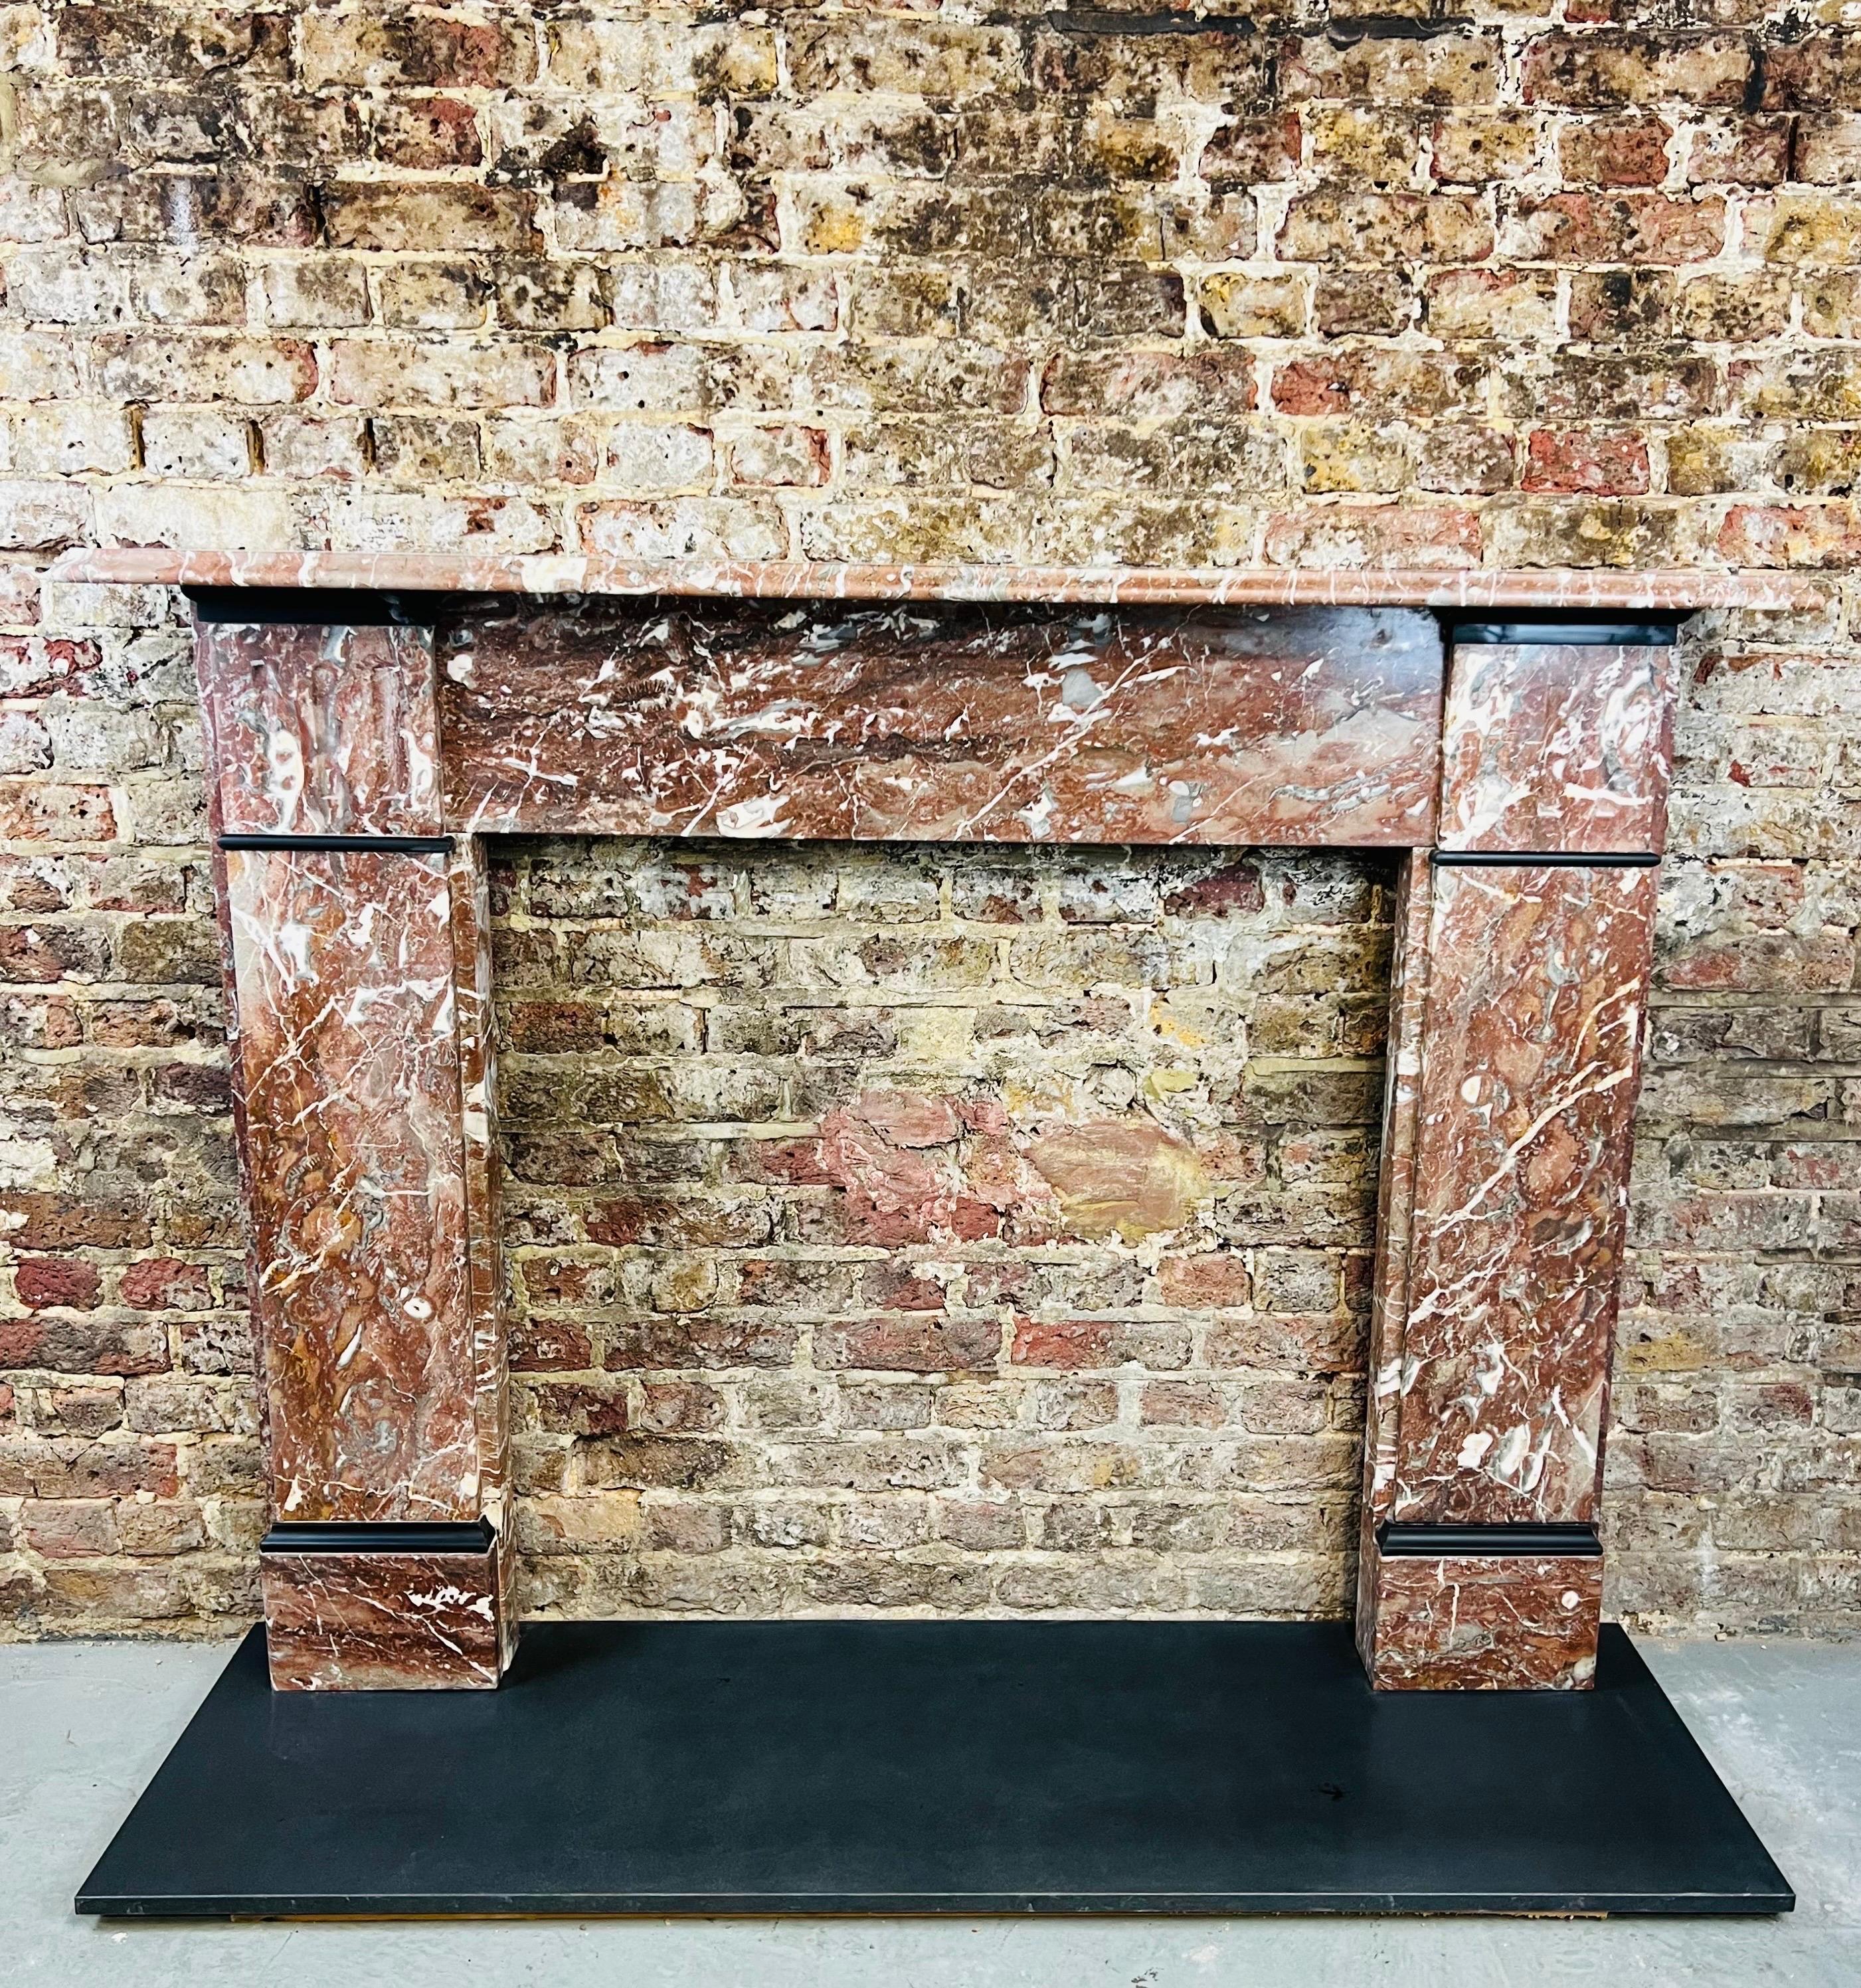 19th Century marble fireplace mantlepiece.
English made original English Victorian rouge marble surround. 
Recently salvaged from a prominent london city town house. 
Dimensions:This fireplace has been lightly restored and polished back to its